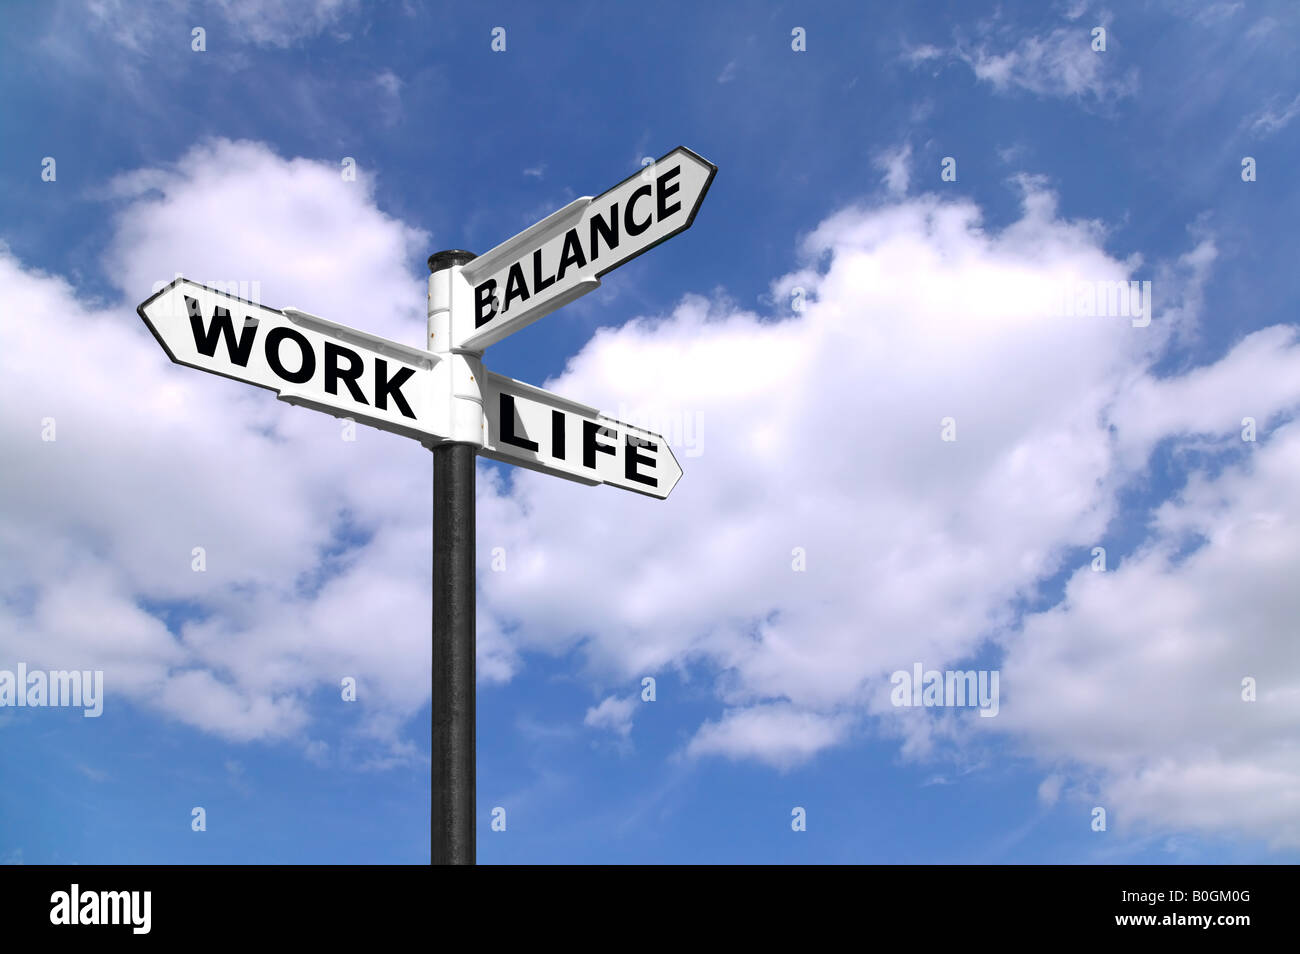 Concept lifestyle image of a signpost directing Work Life Balance against a blue cloudy sky Stock Photo